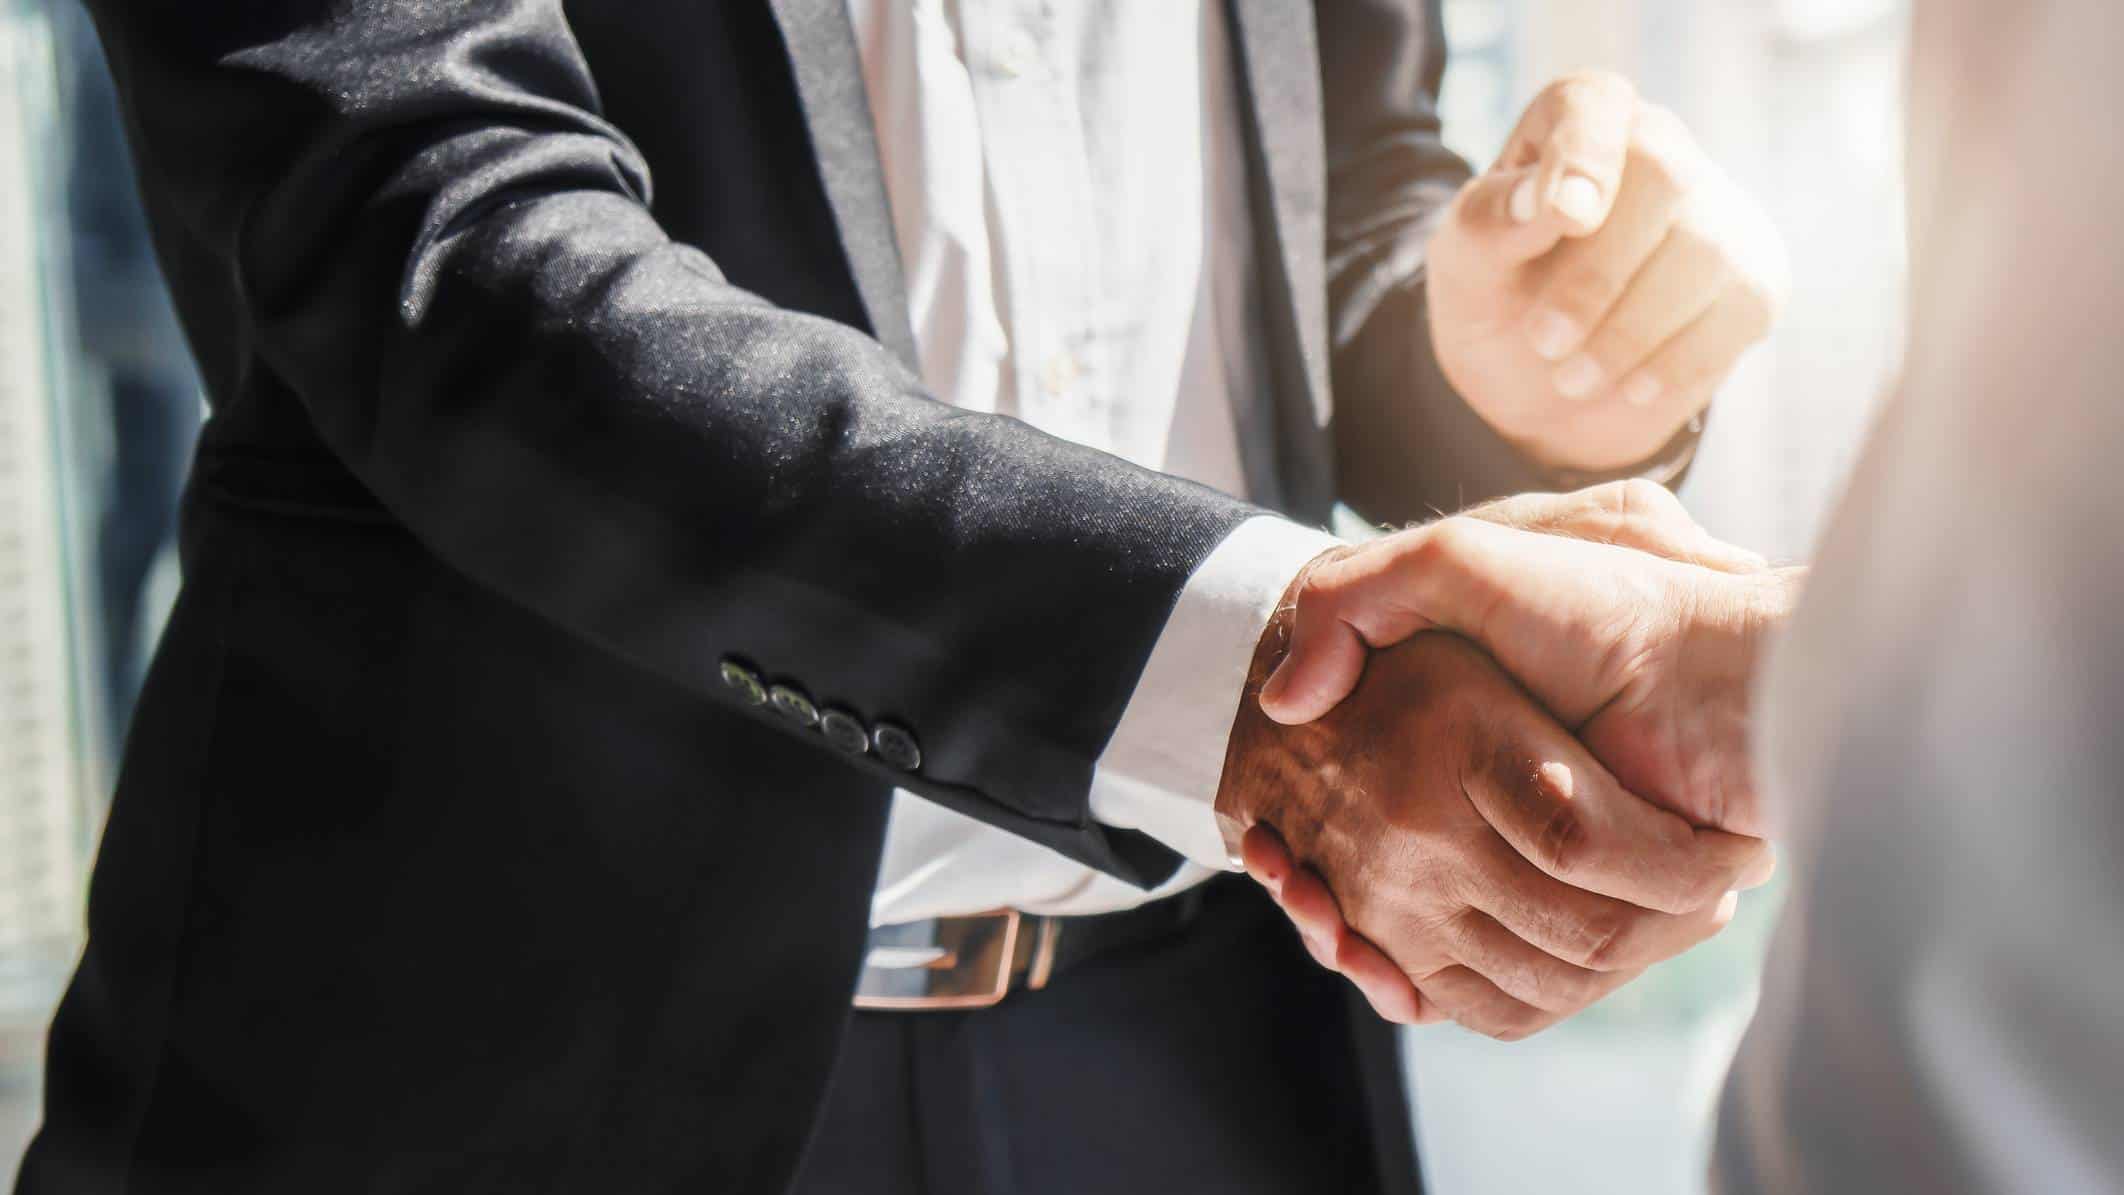 2 businessmen shaking hands, indicating a partnership deal and share price lift